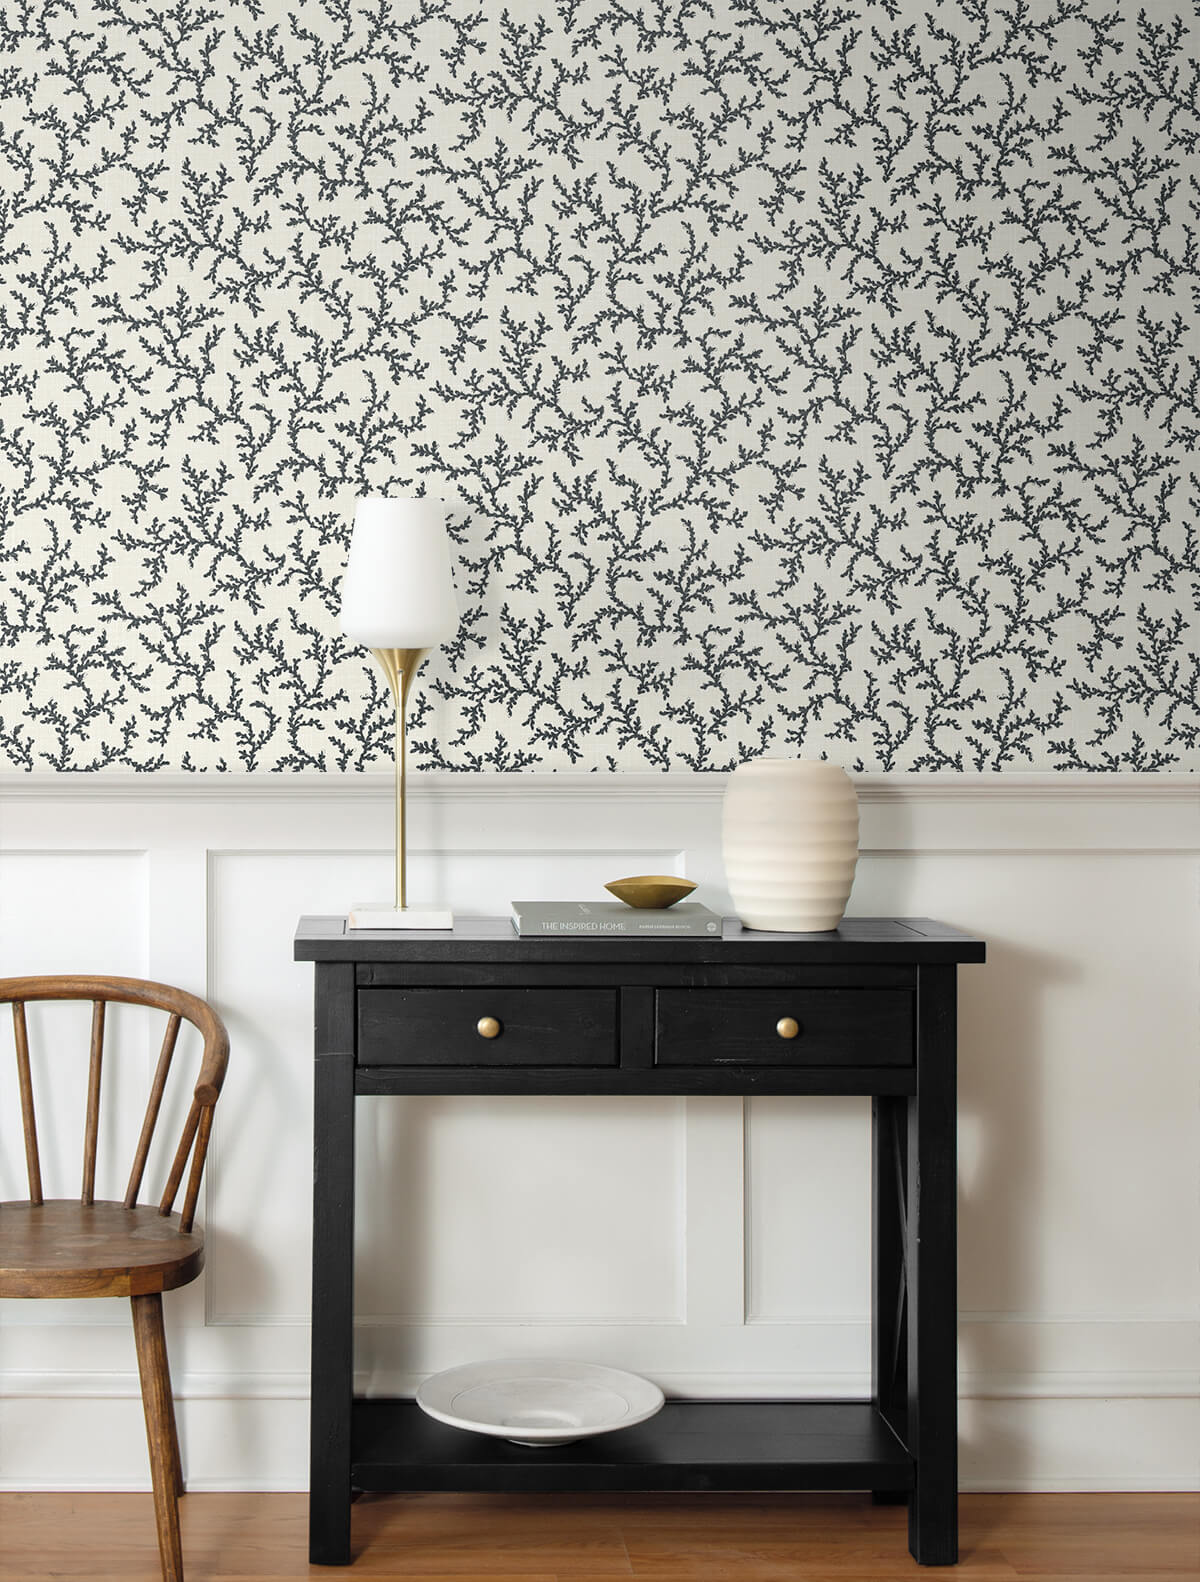 Seabrook French Country Corail Wallpaper - Poppy Seed